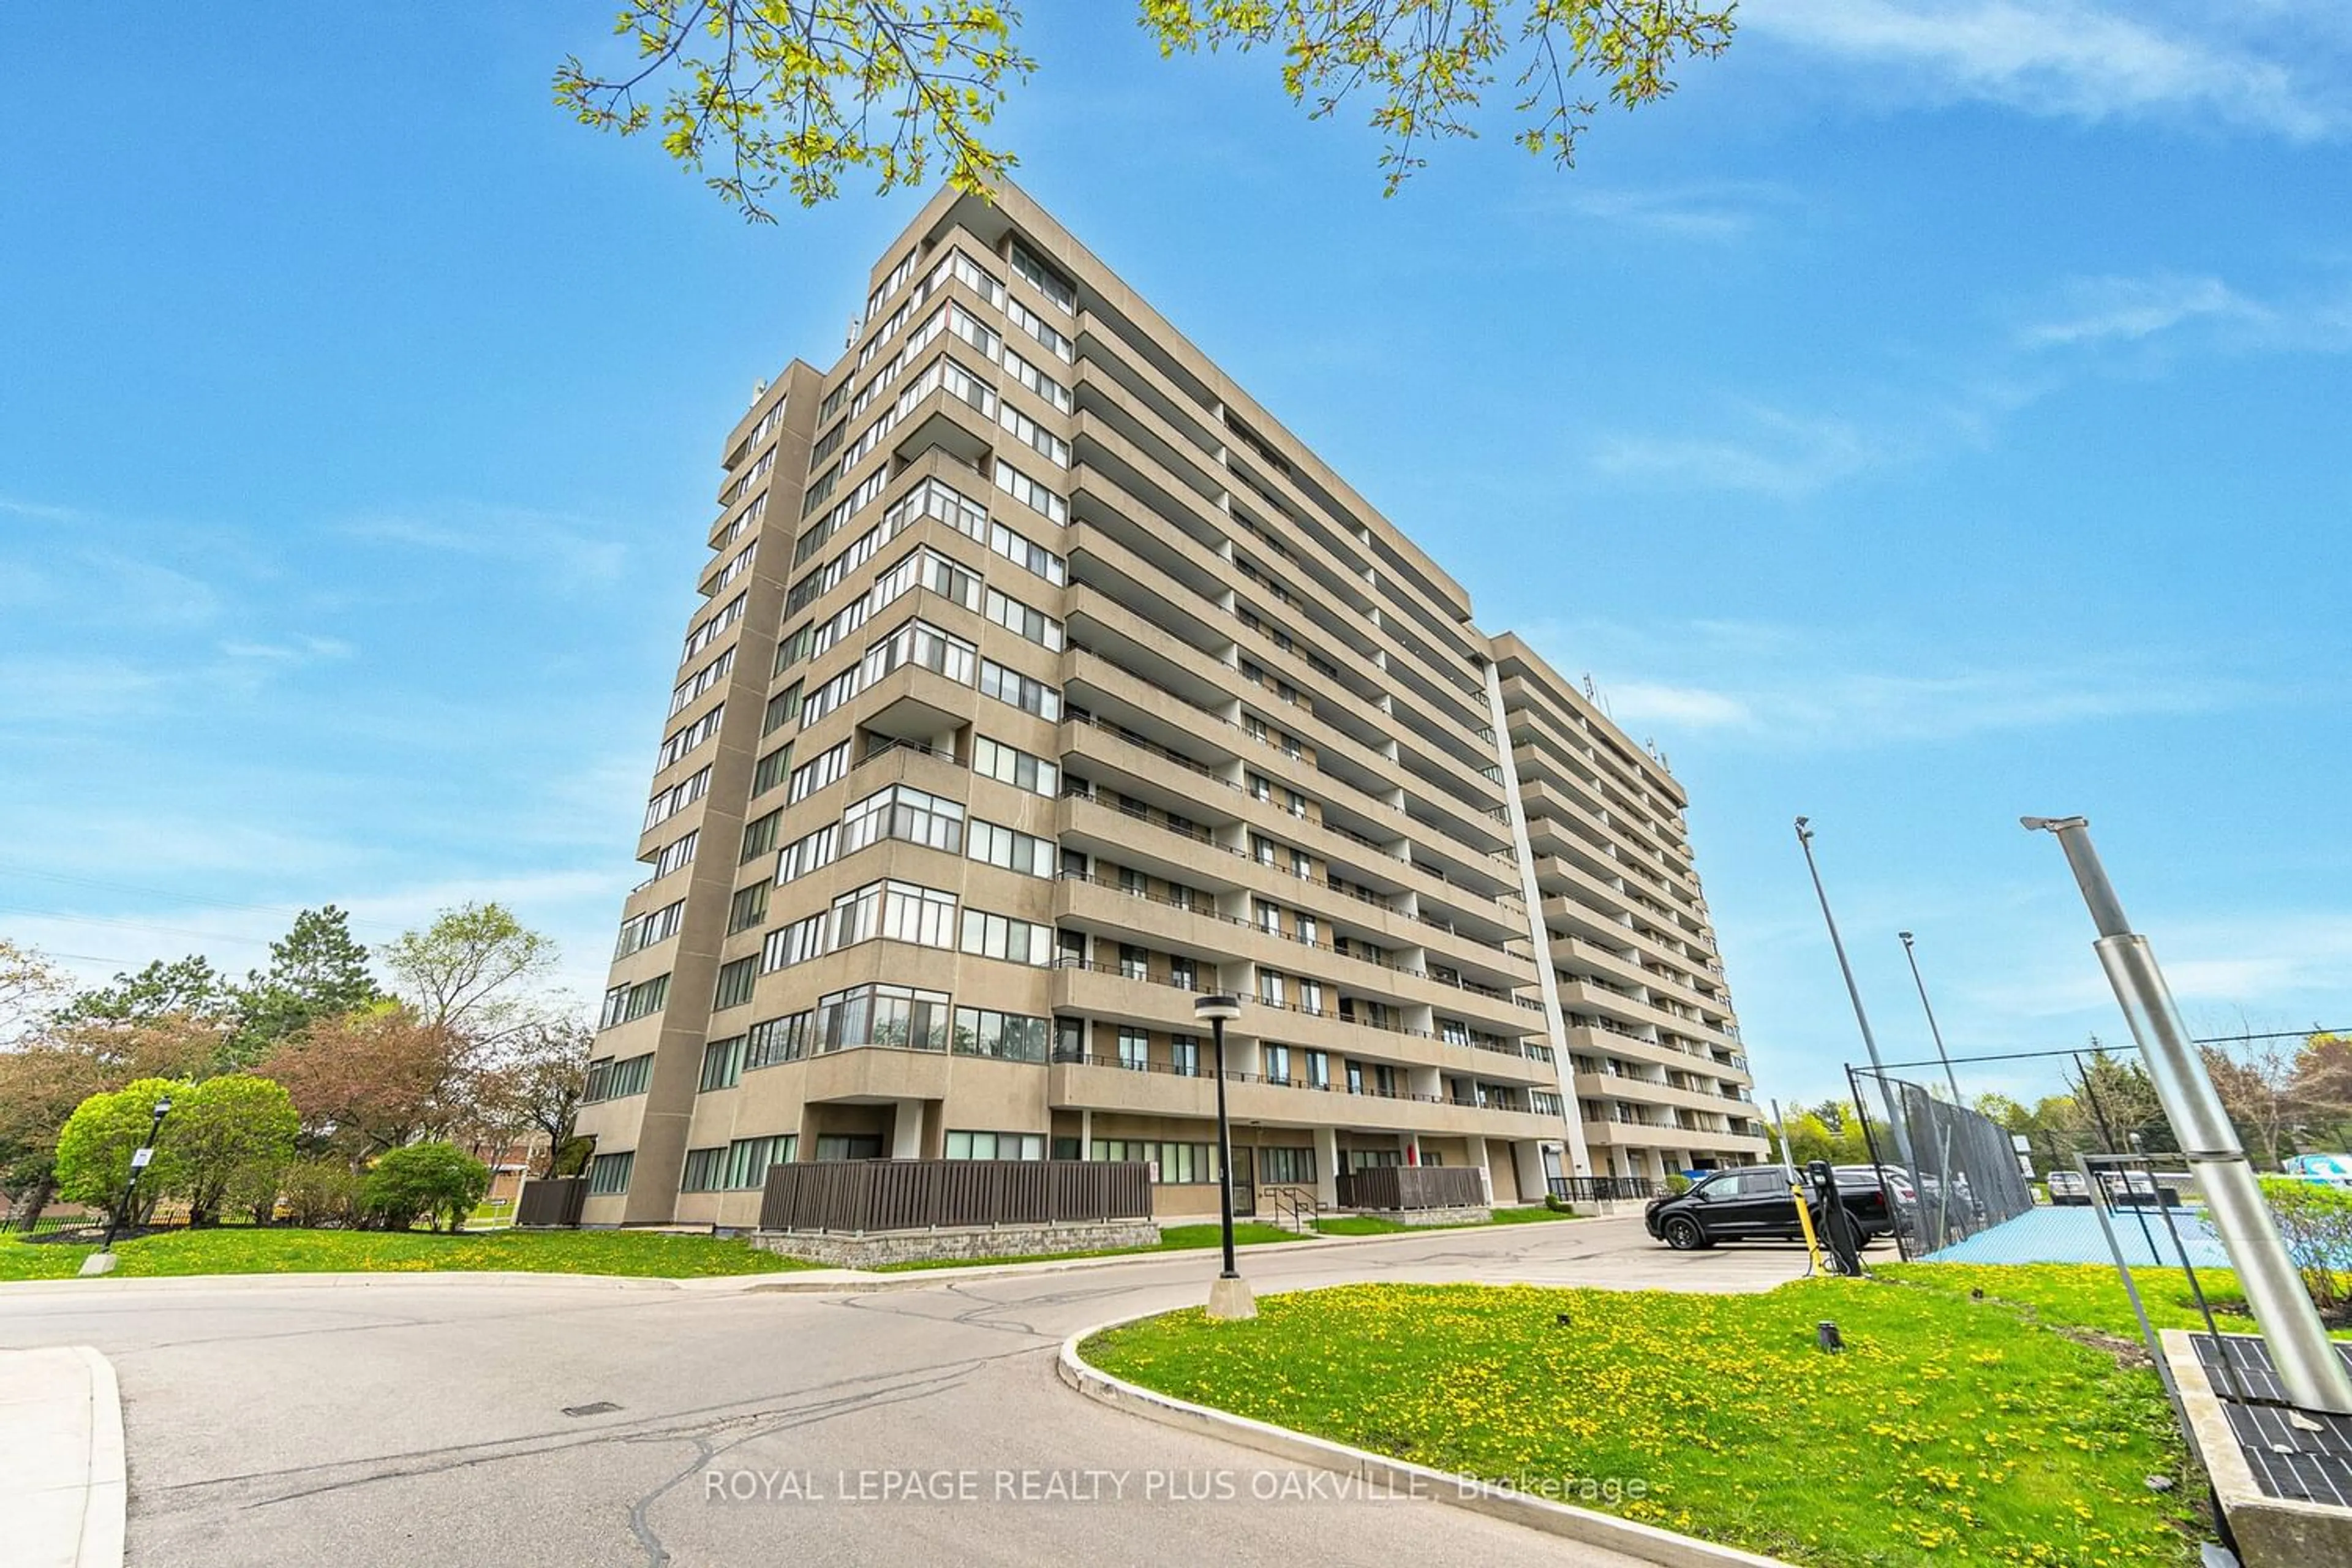 A pic from exterior of the house or condo for 1300 Mississauga Valley Blvd #1002, Mississauga Ontario L5A 3S8